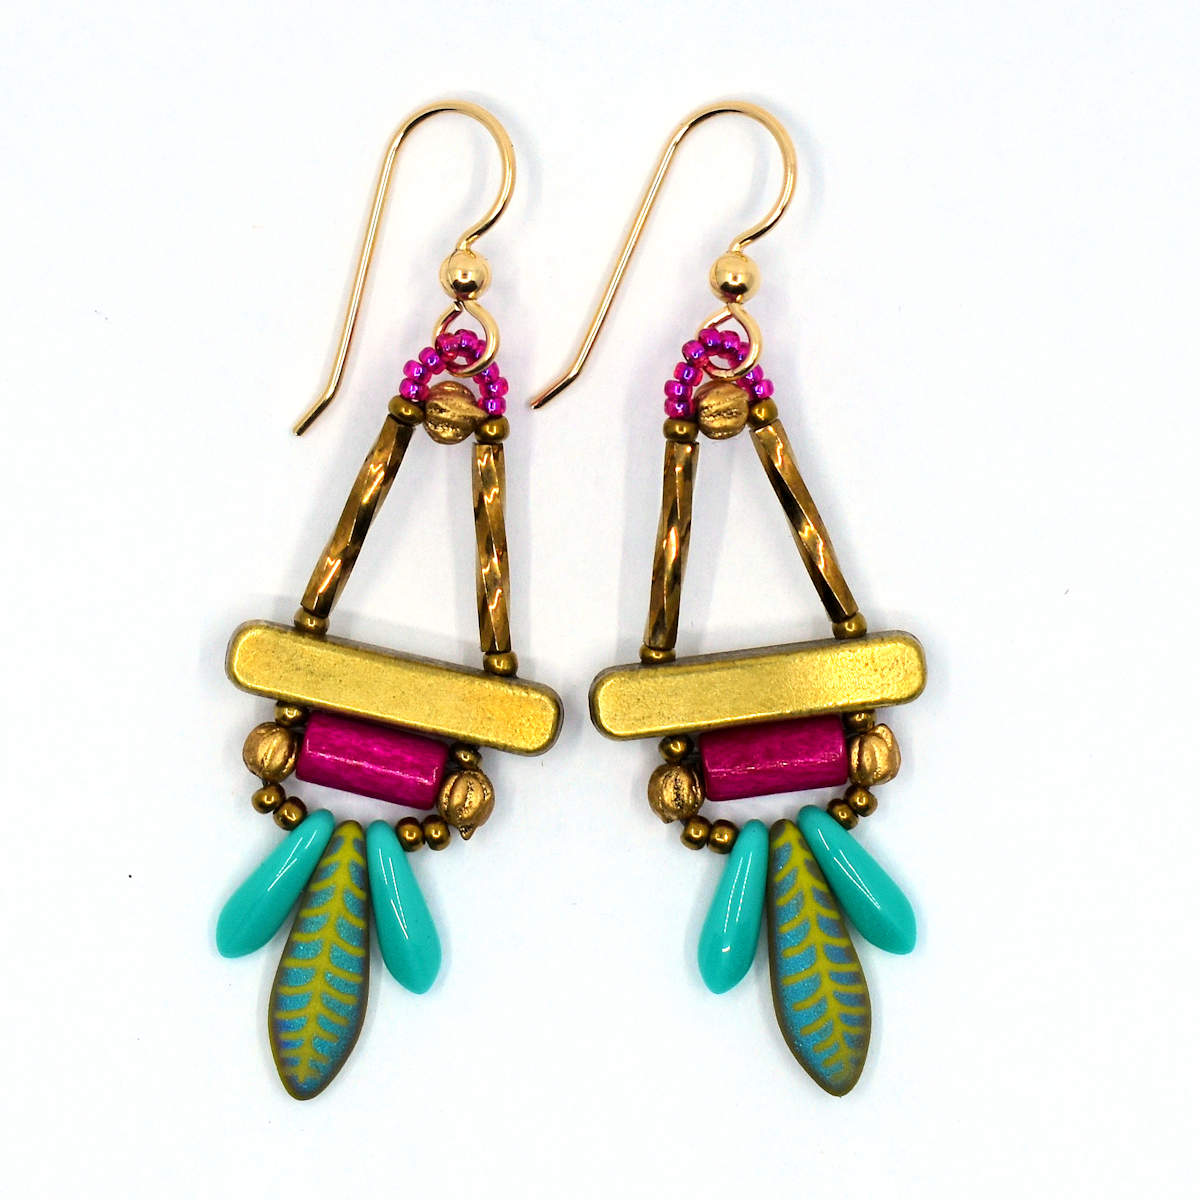 Turquoise, gold and magenta earrings on a white background. The earrings have two gold tubes that form the top of a triangle and a gold colored bar that forms the base. Below the bar is fat magenta tube with gold beads on either side. At the bottom is a green dagger etched with an iridescent feather pattern sandwiched between two smaller turquoise dagger beads.